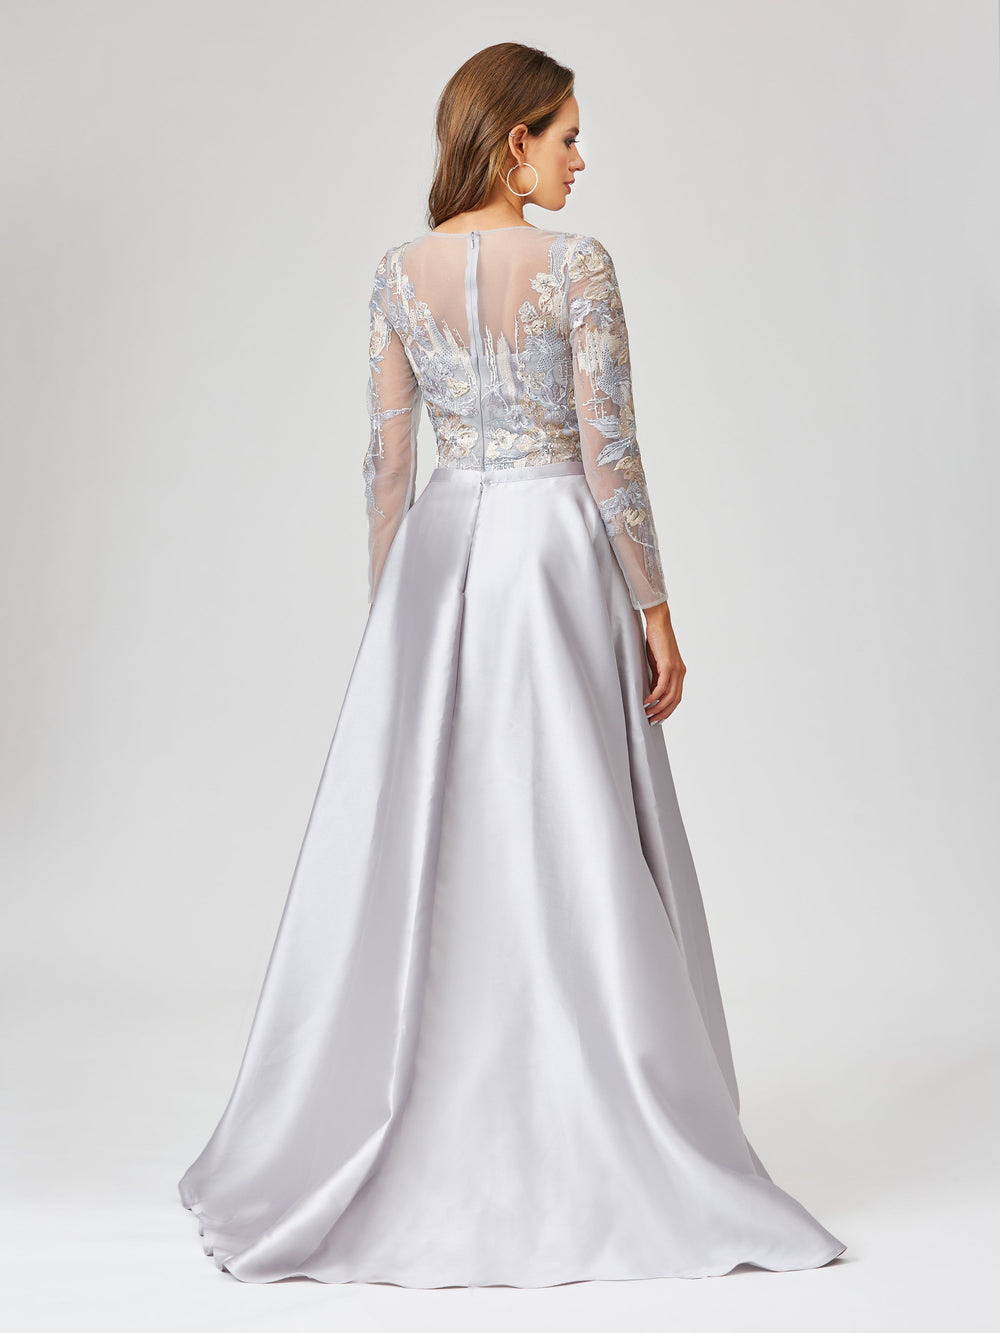 Lara 29468 - Long Sleeve Lace Gown with Removable Over Skirt - FOSTANI